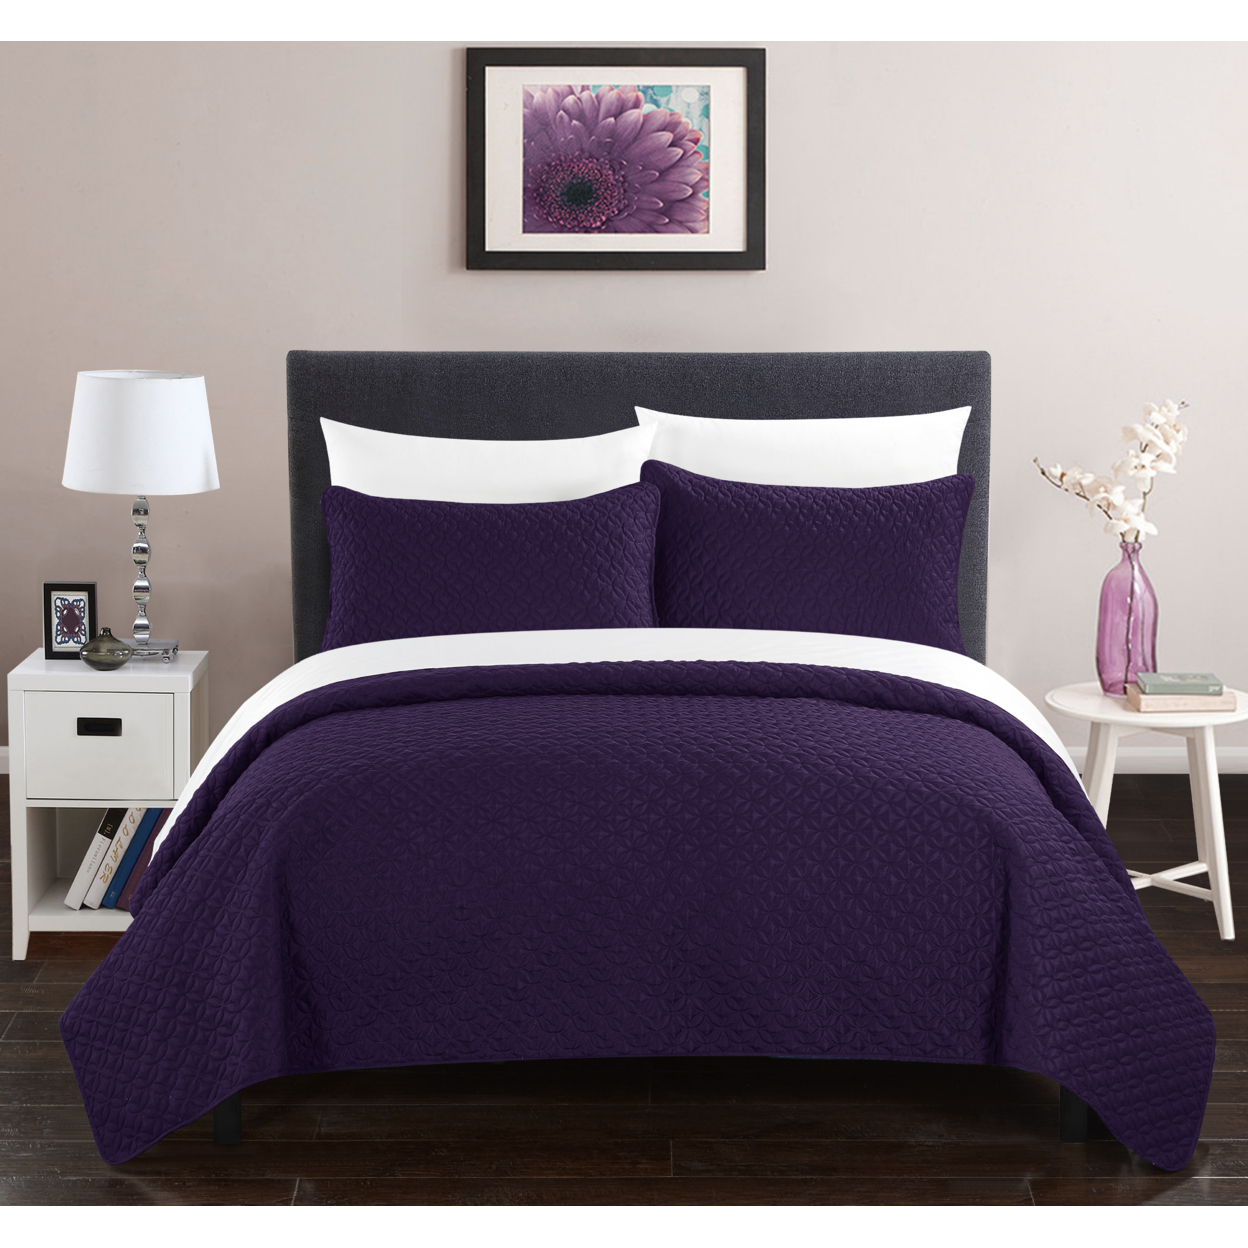 Gideon 3 Or 2 Piece Quilt Cover Set Rose Star Geometric Quilted Bedding - Purple, King